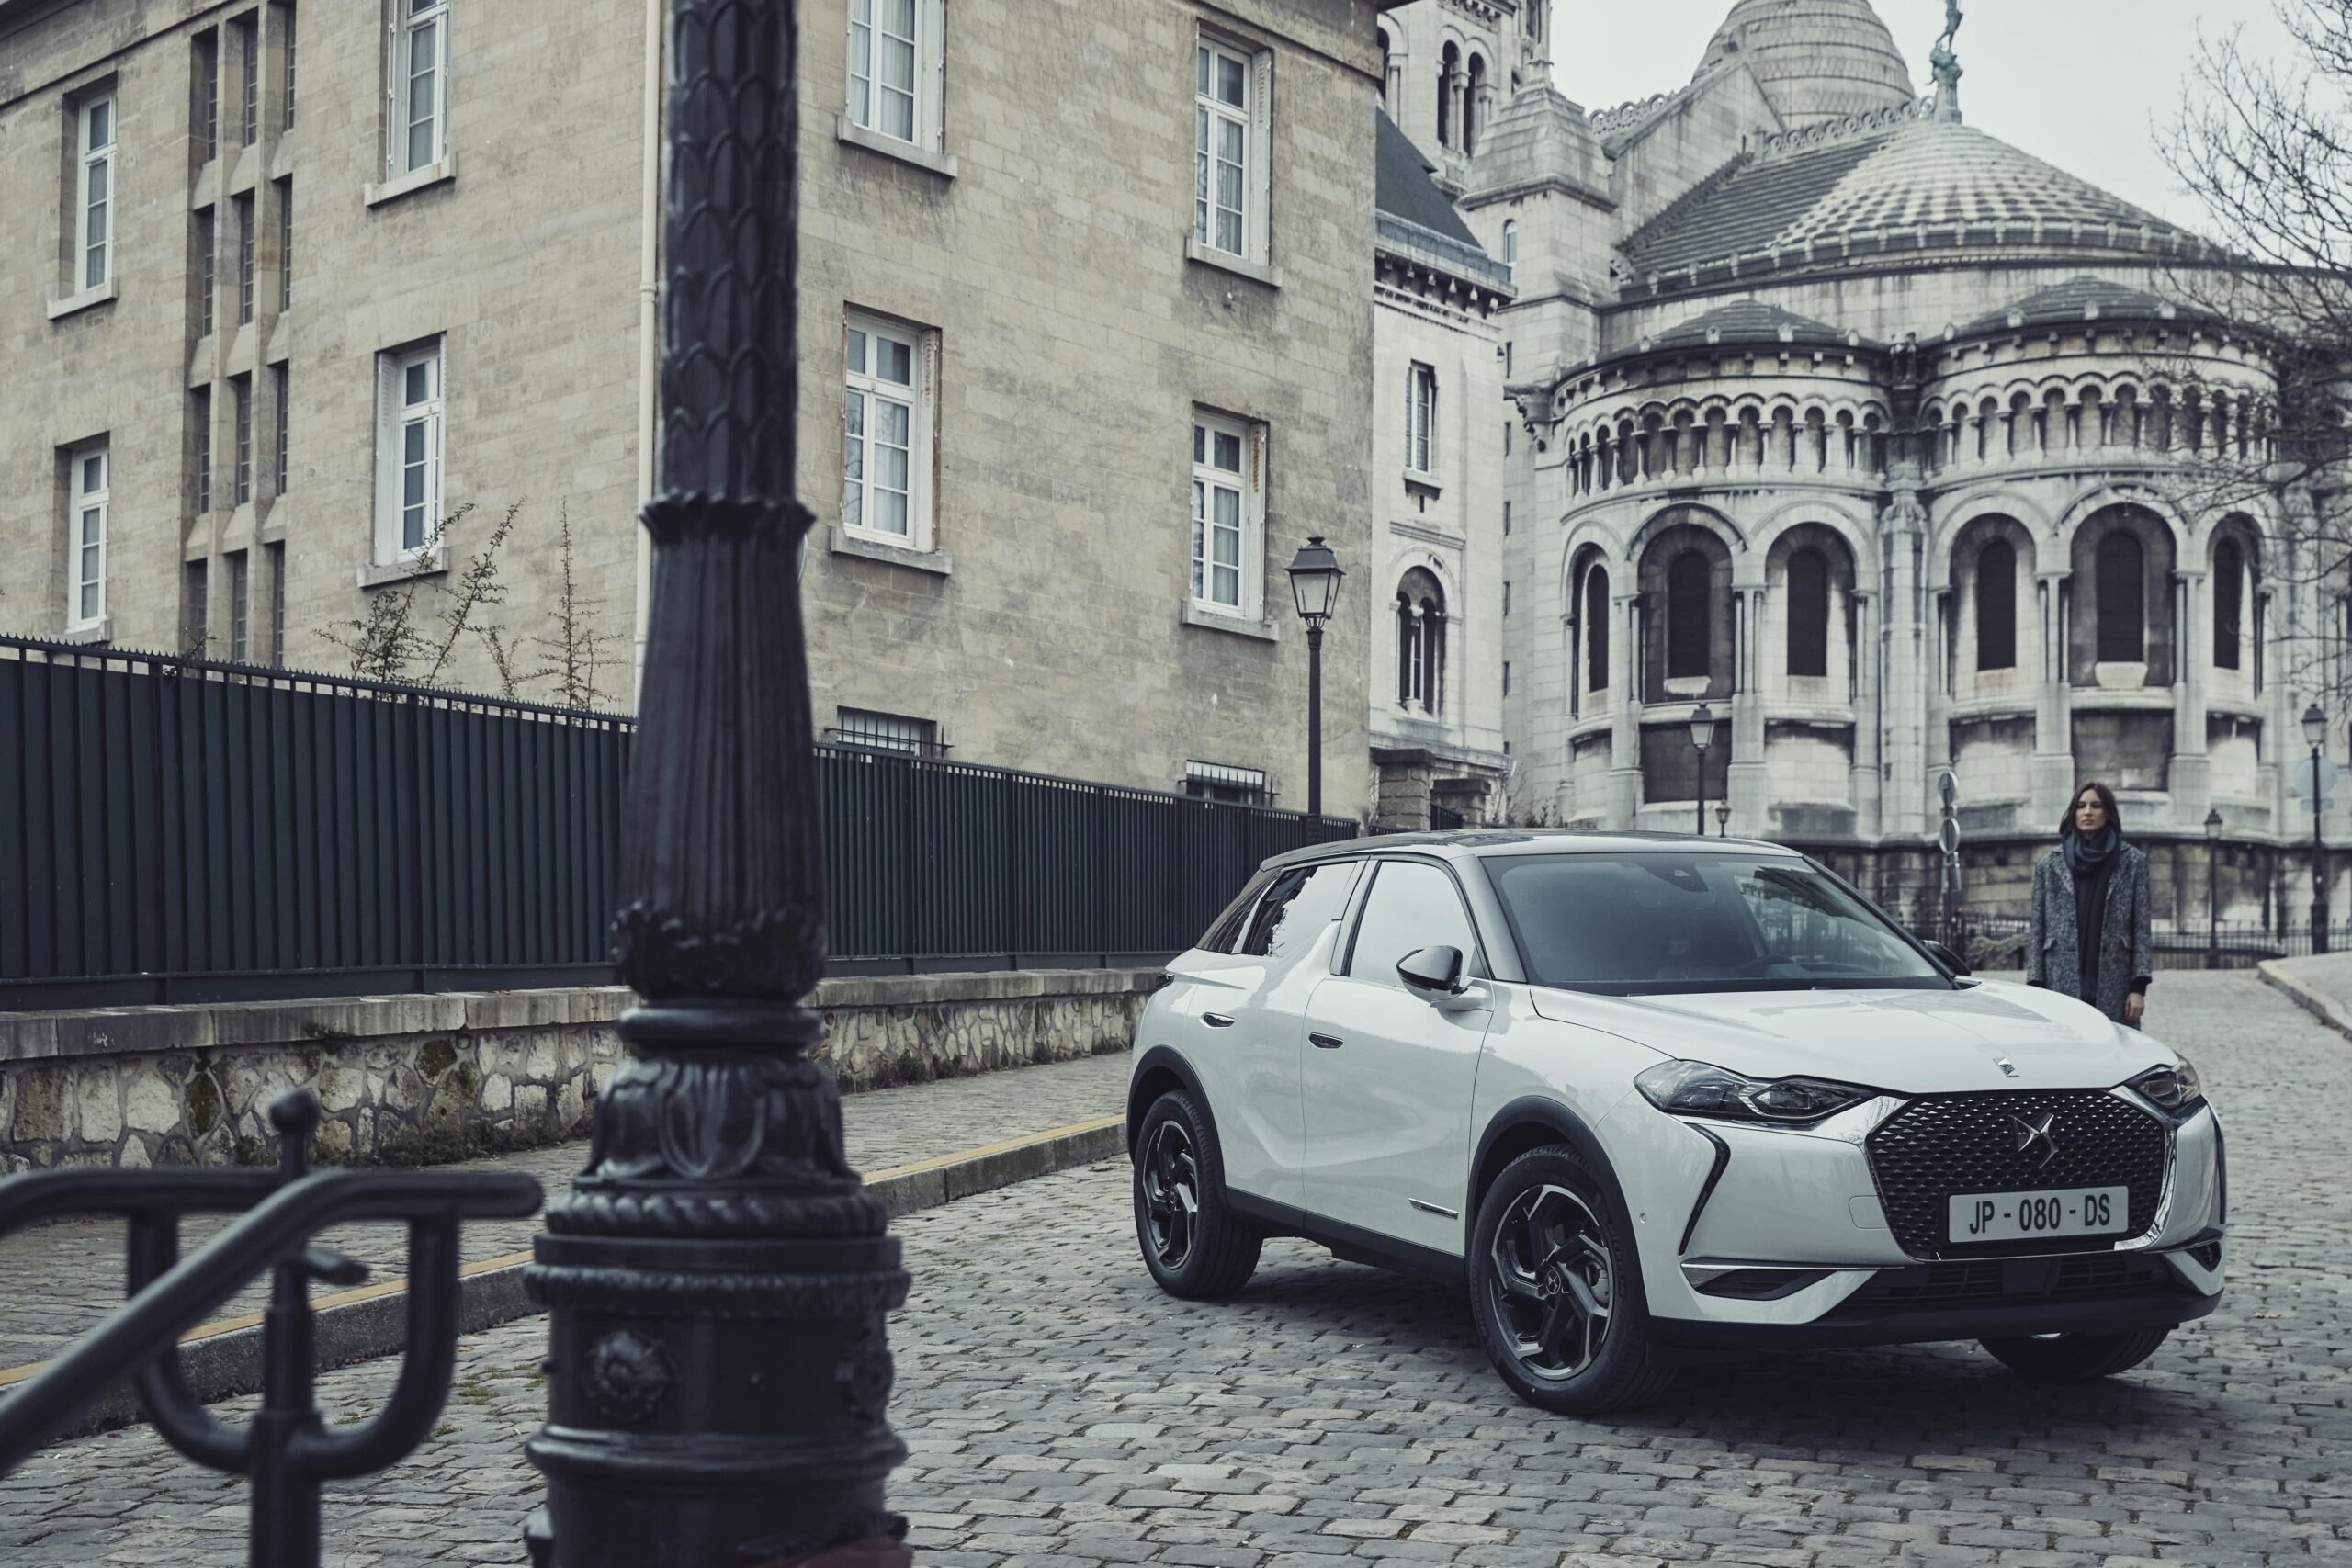 DS 3 CROSSBACK TOITS (7)